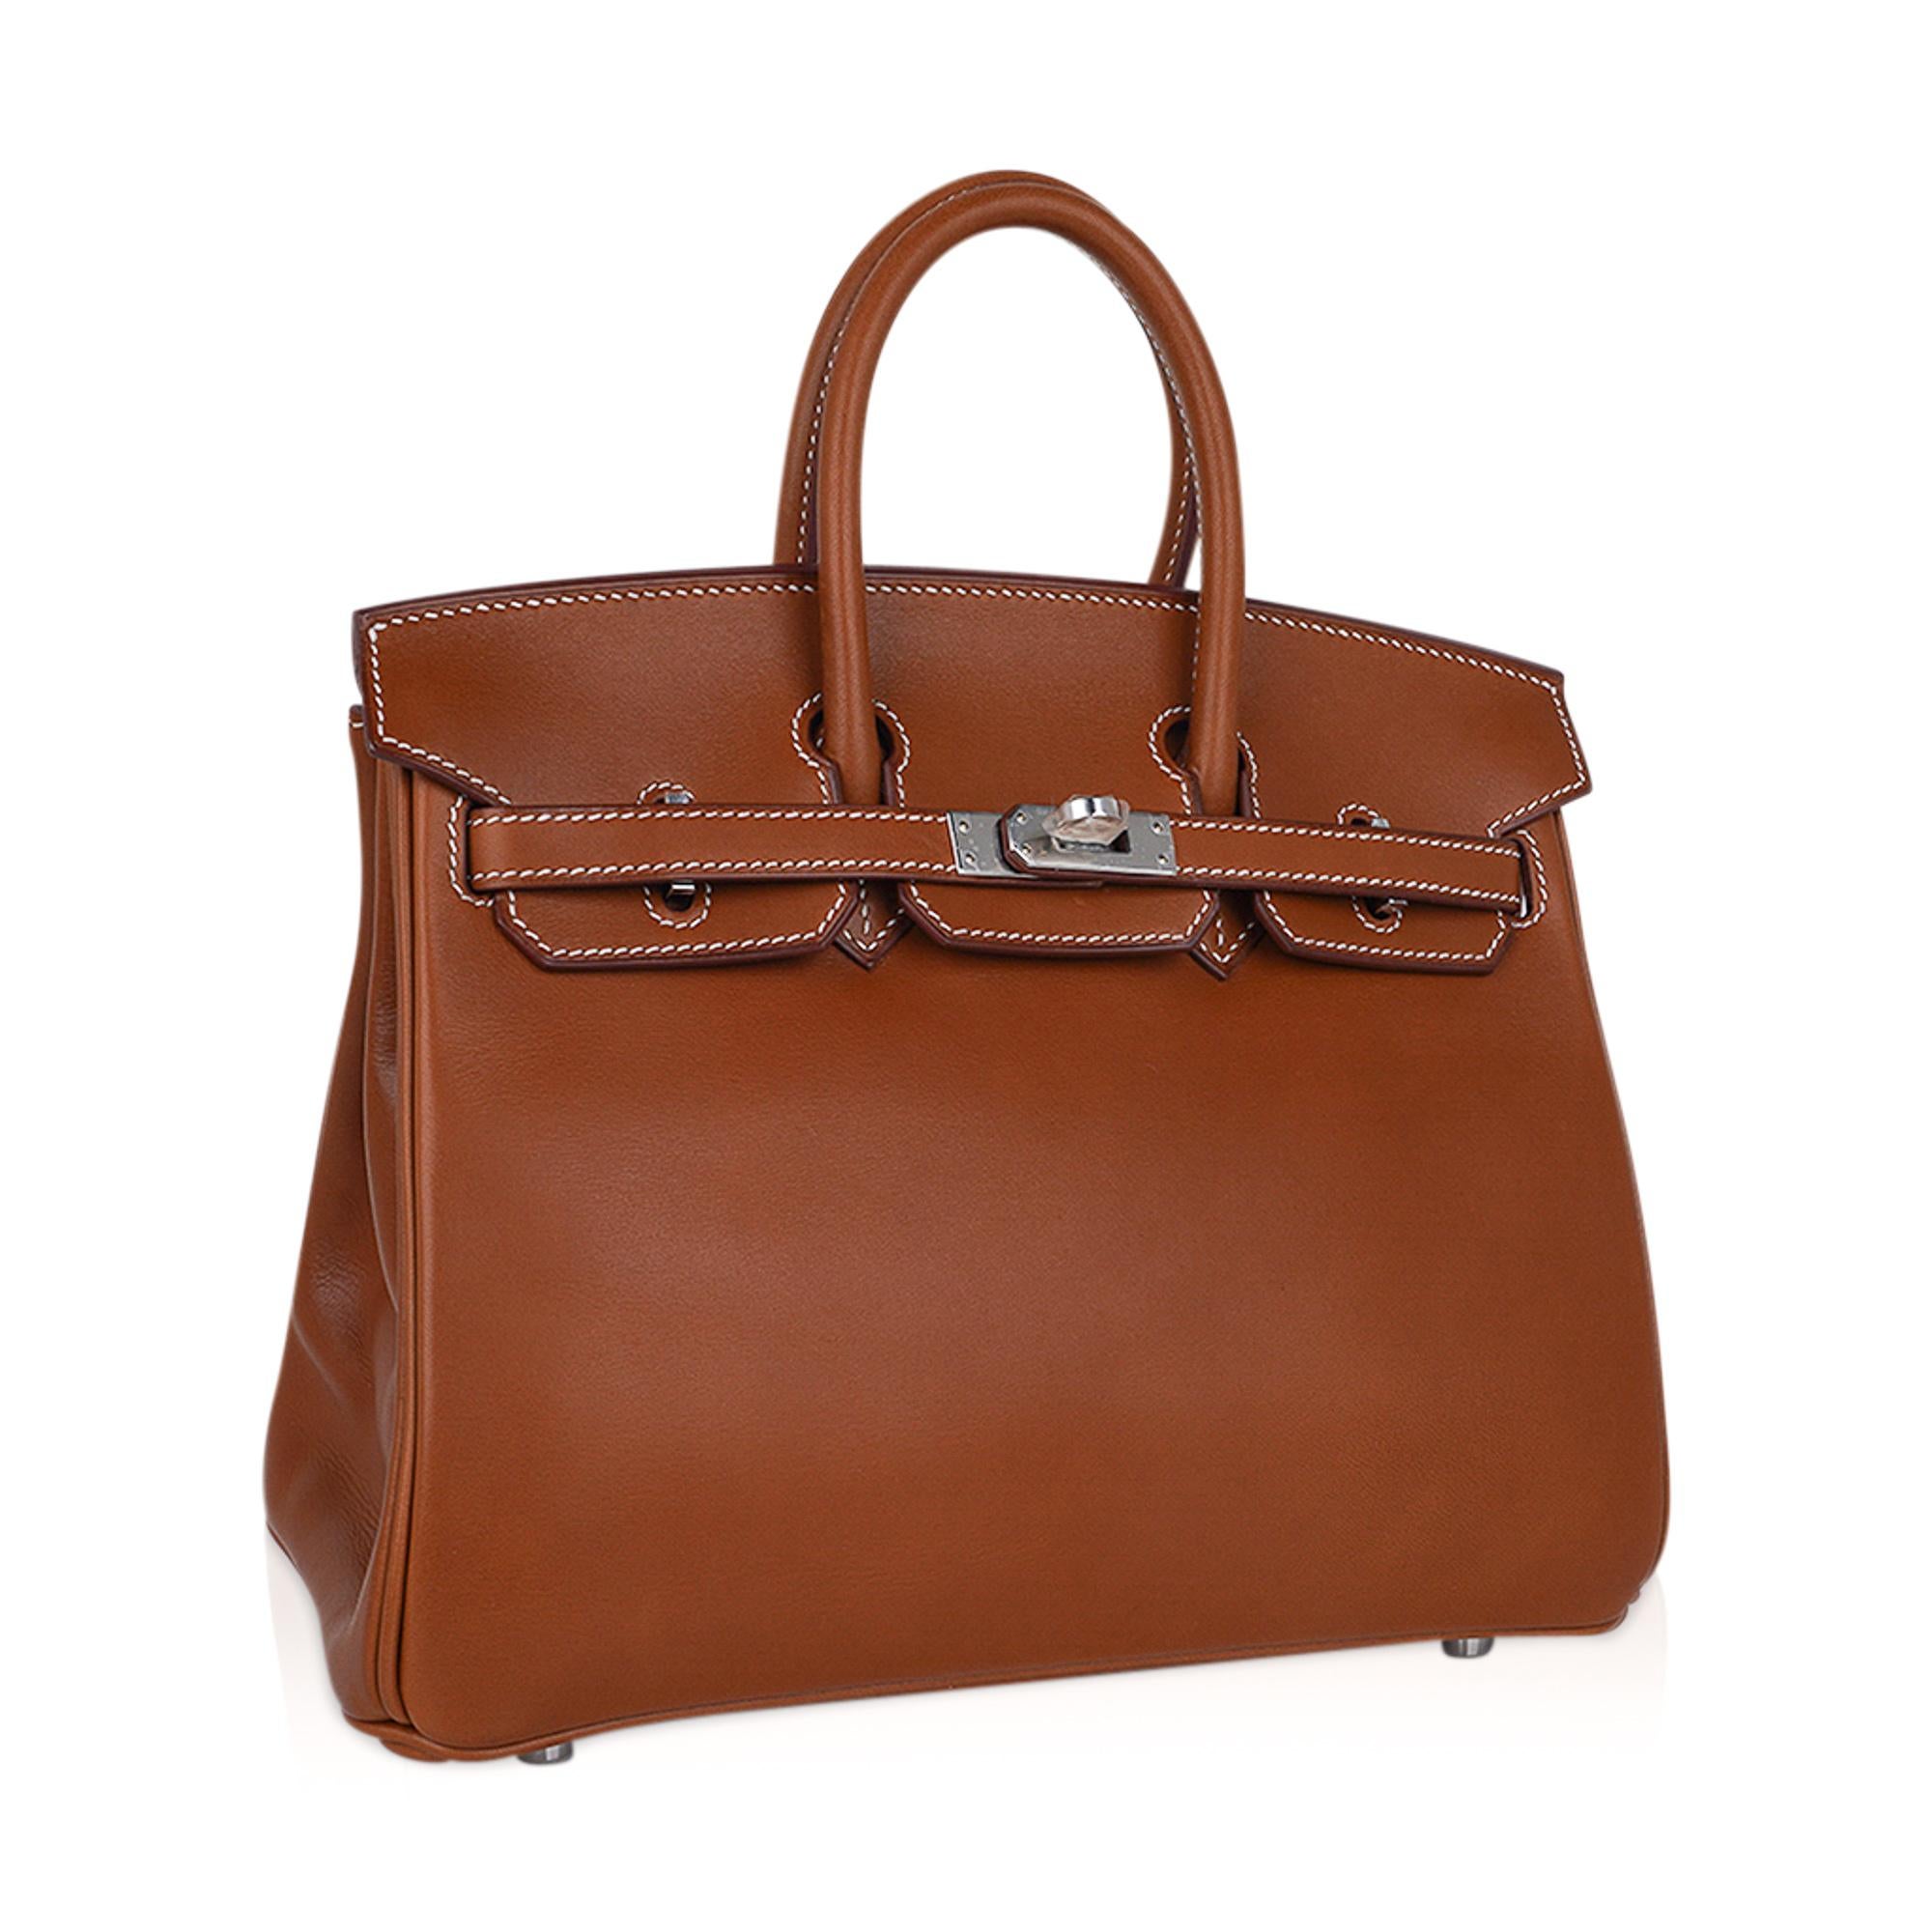 Mightychic offers a limited edition Hermes Birkin 25 bag featured in coveted Fauve Barenia with white topstitch.
This prized Barenia leather Birkin is virtually impossible to find, and true collectors treasure.
Rich neutral Hermes Birkin bag perfect